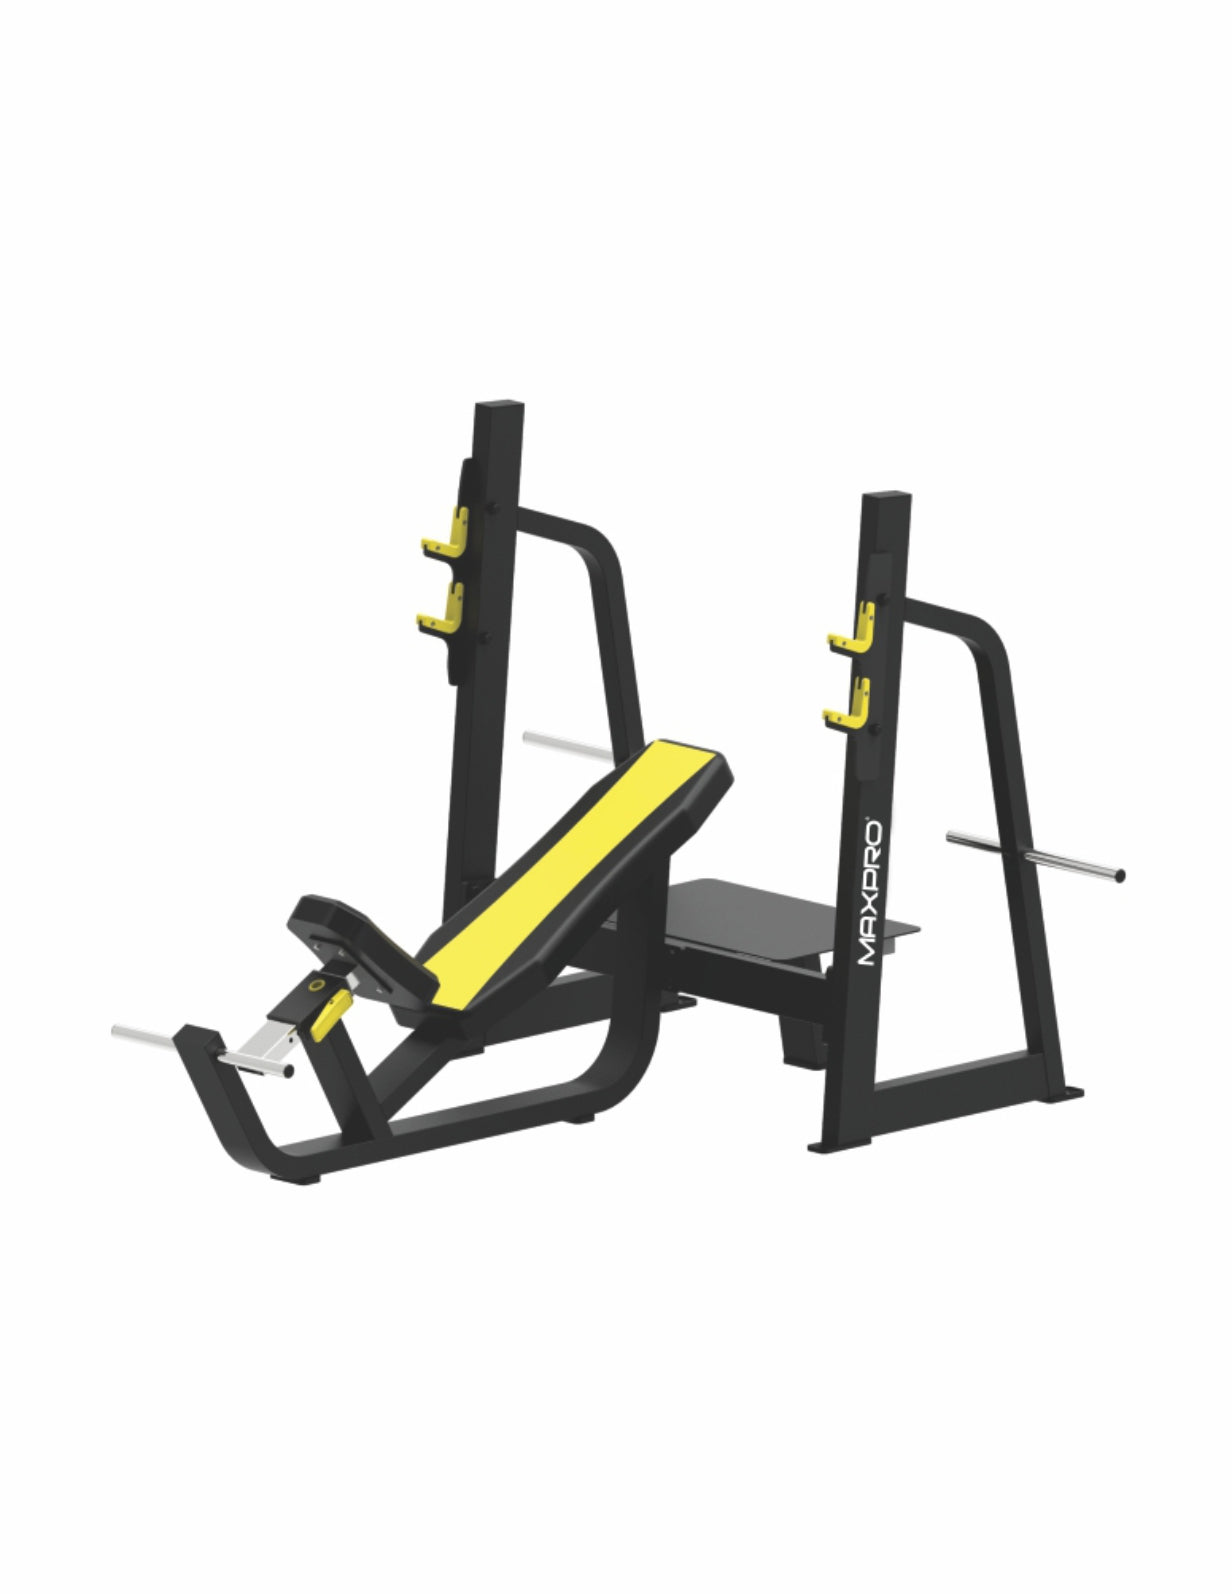 MB2611 OLYMPIC INCLINE BENCH